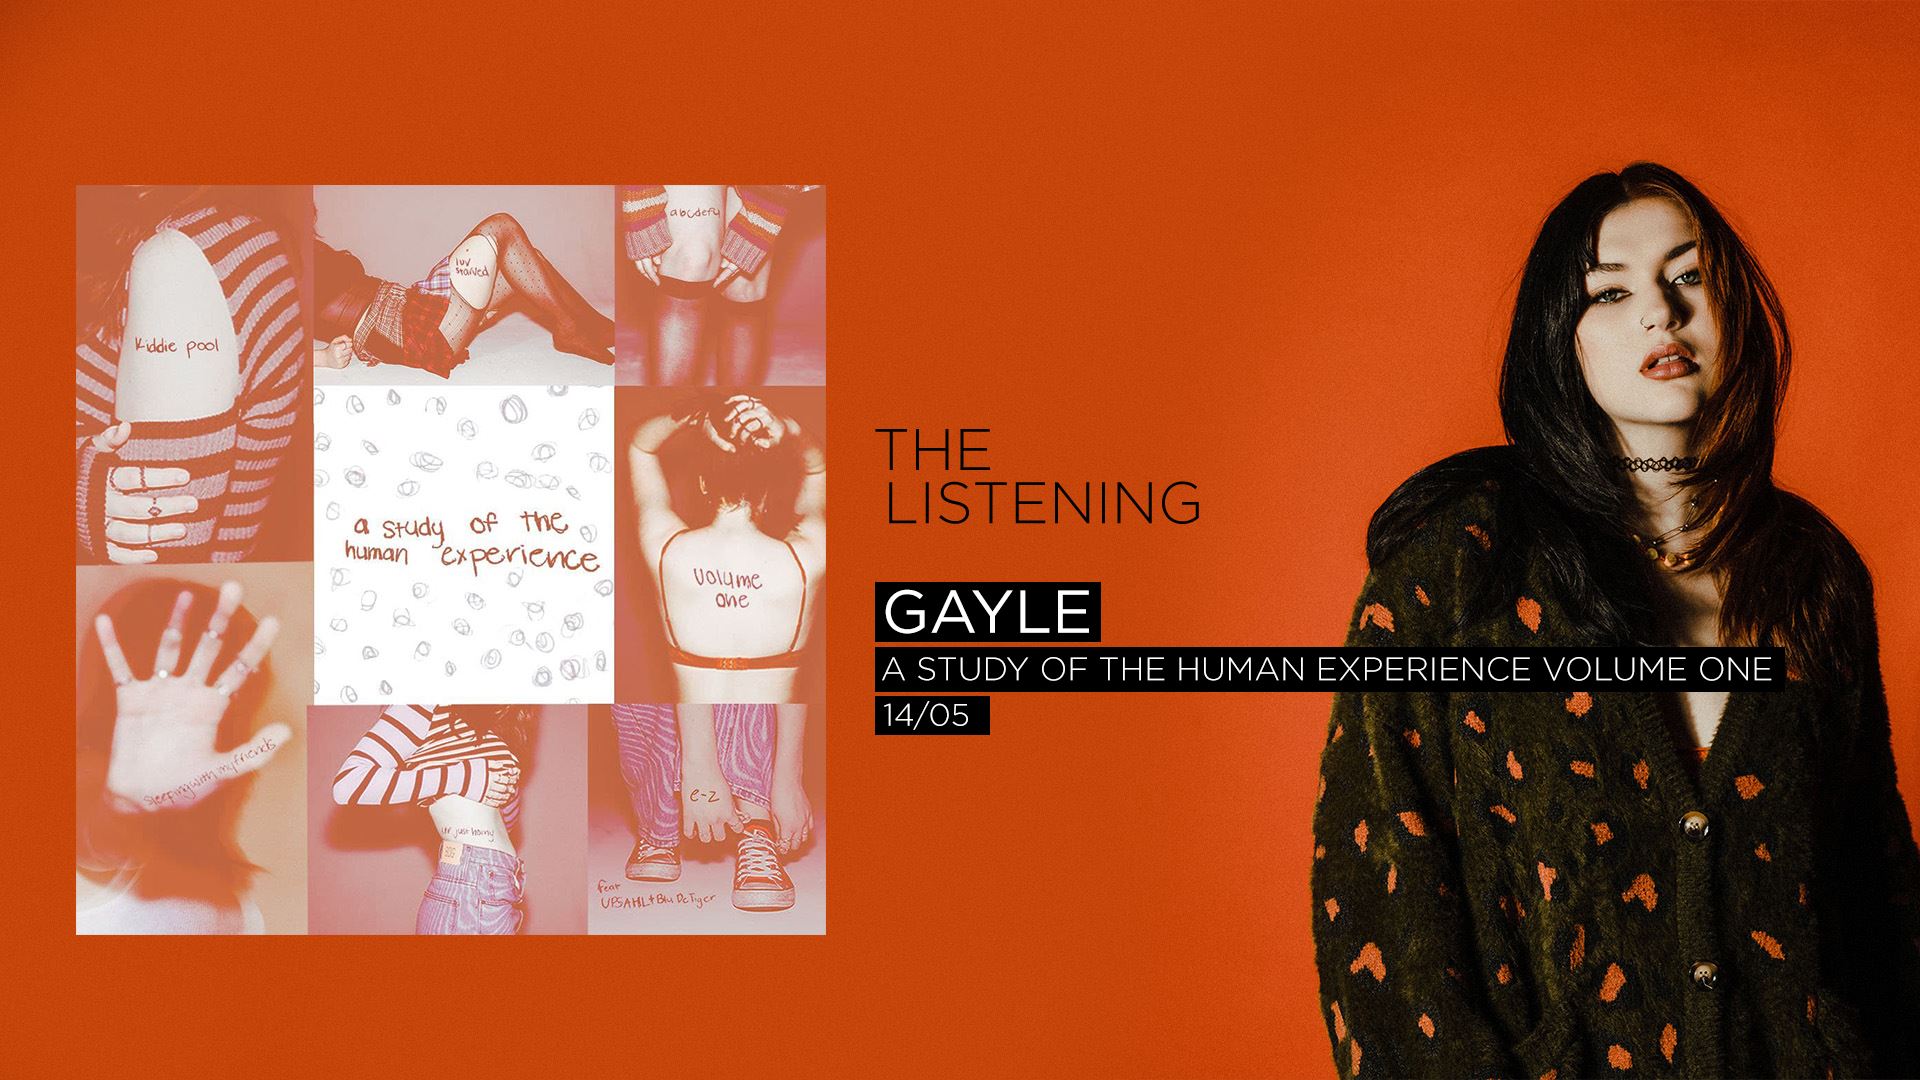 GAYLE | A STUDY OF THE HUMAN EXPERIENCE VOLUME ONE